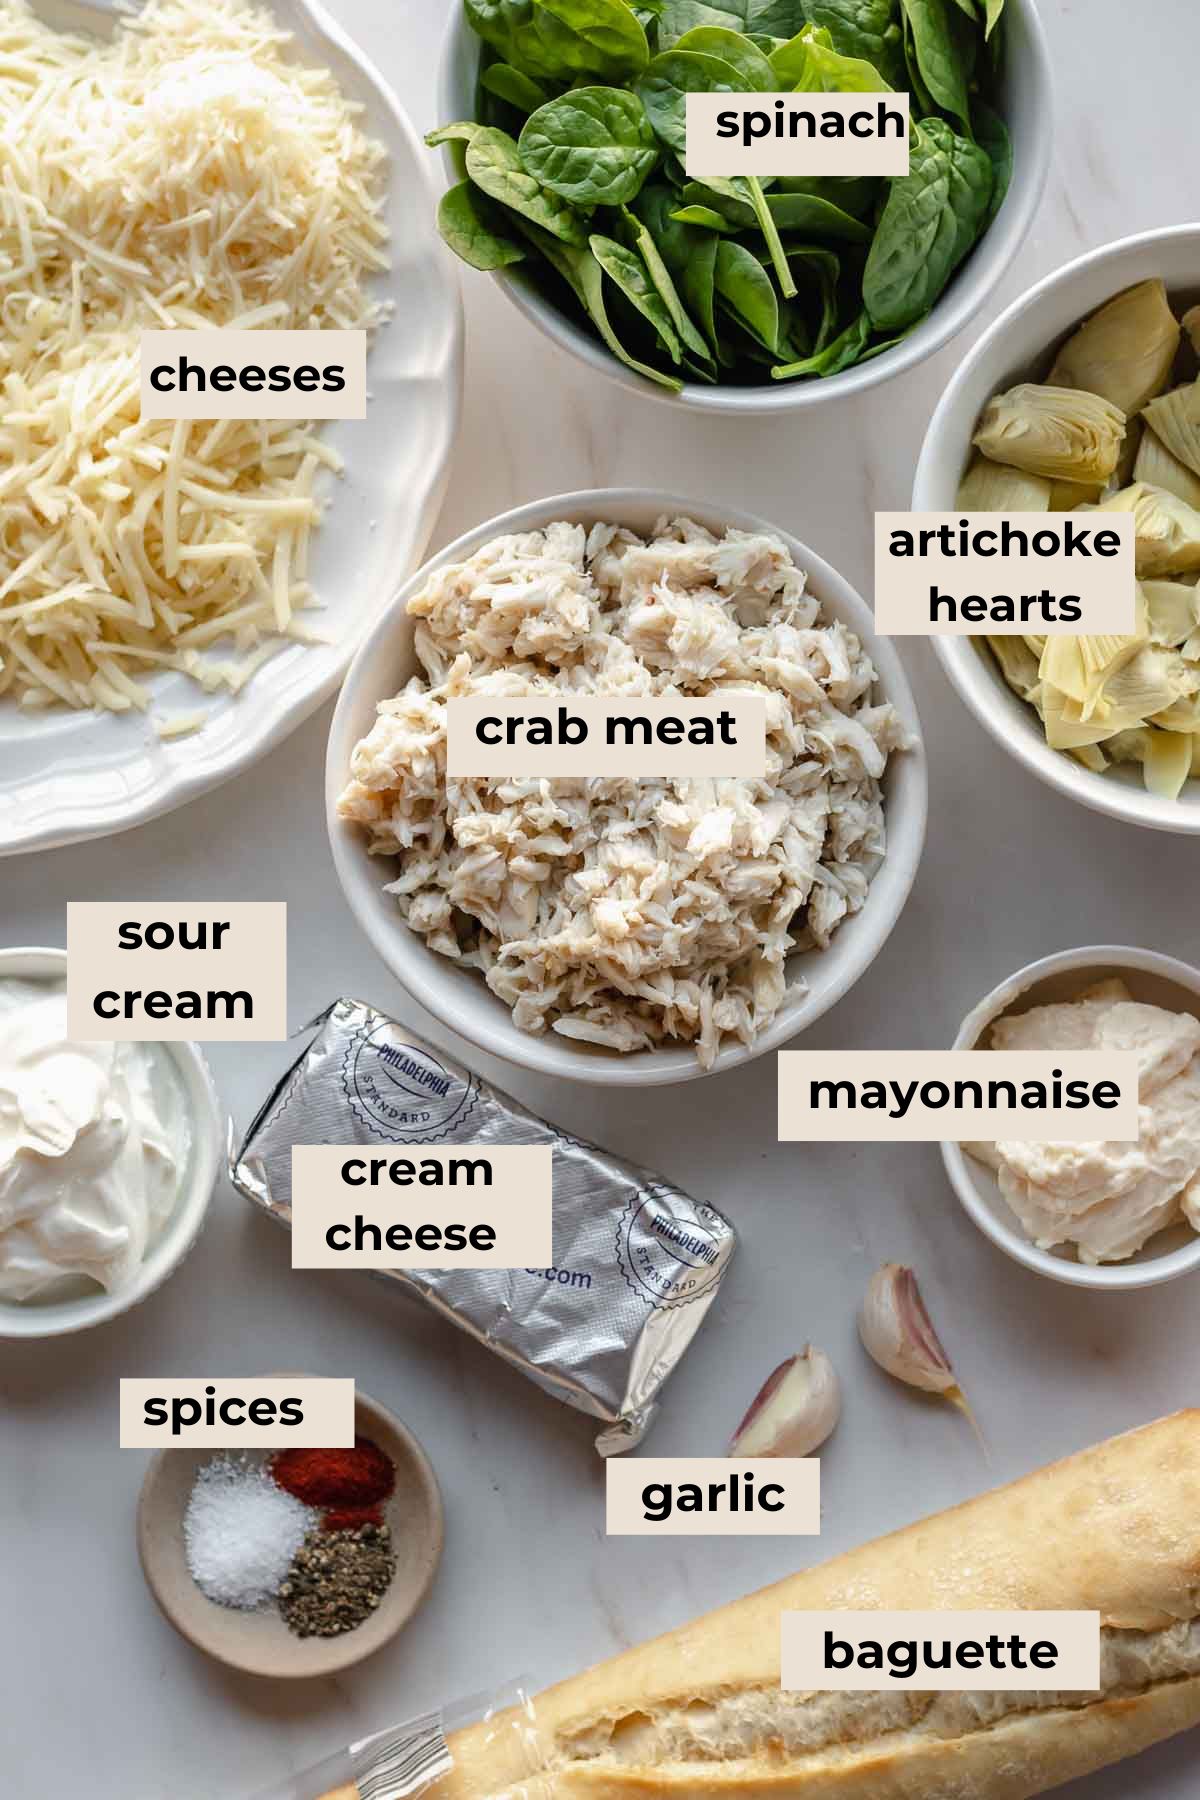 Ingredients for hot crab spinach artichoke dip.